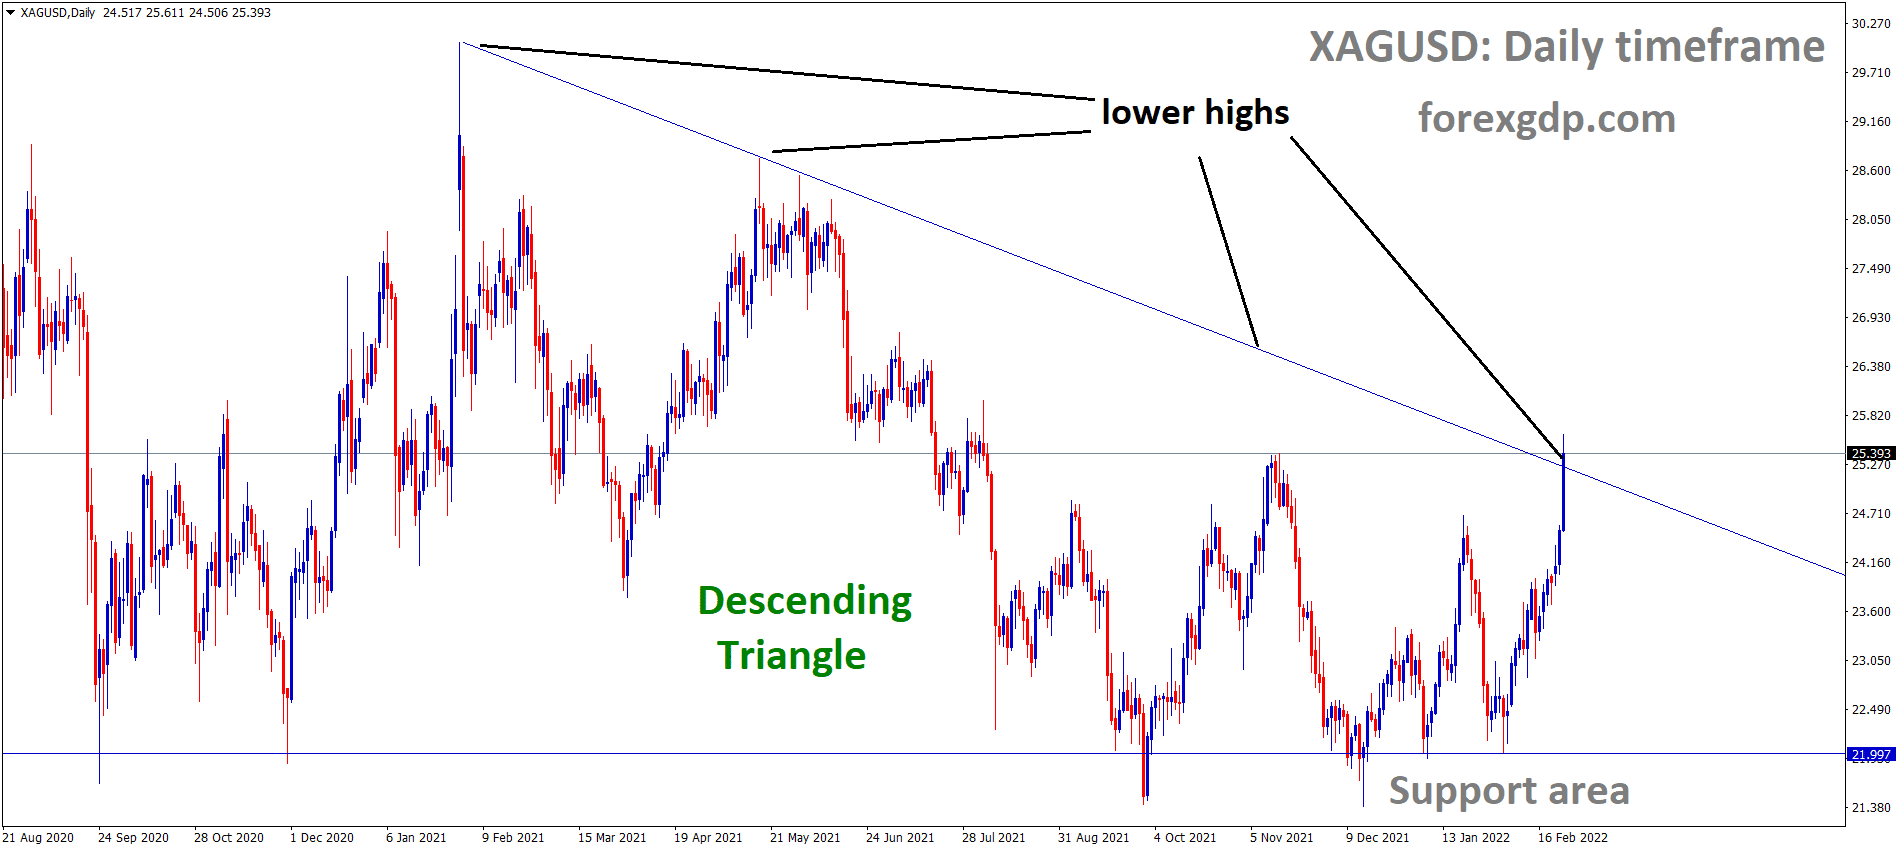 XAGUSD Silver Price is moving in the Descending triangle pattern and the market has reached the lower high area of the pattern.